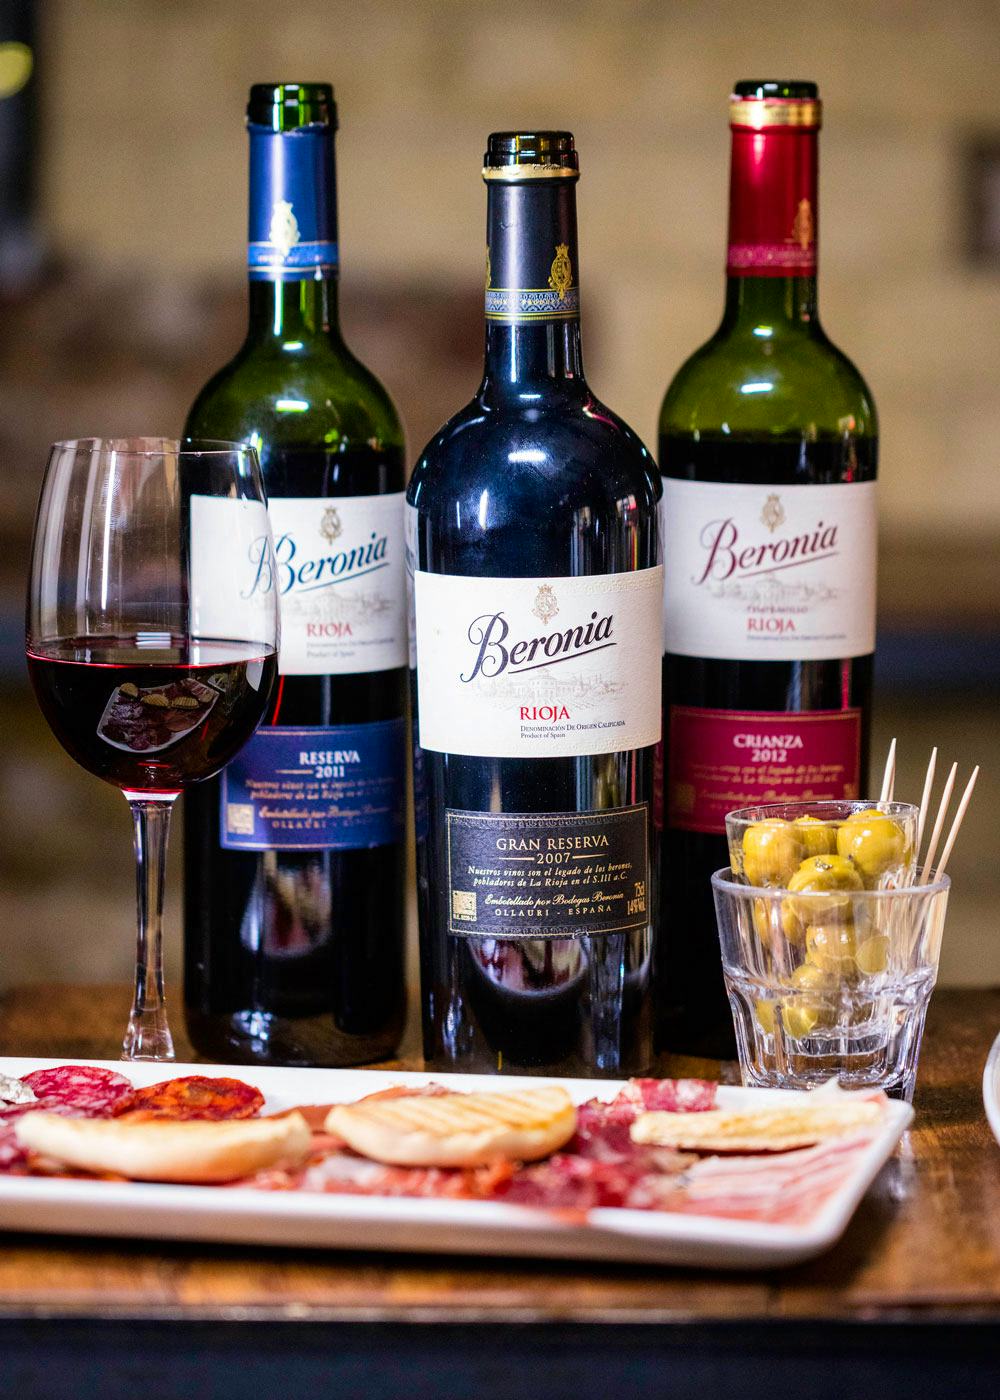 Beronia wine bottles on table with tapas sliced meats